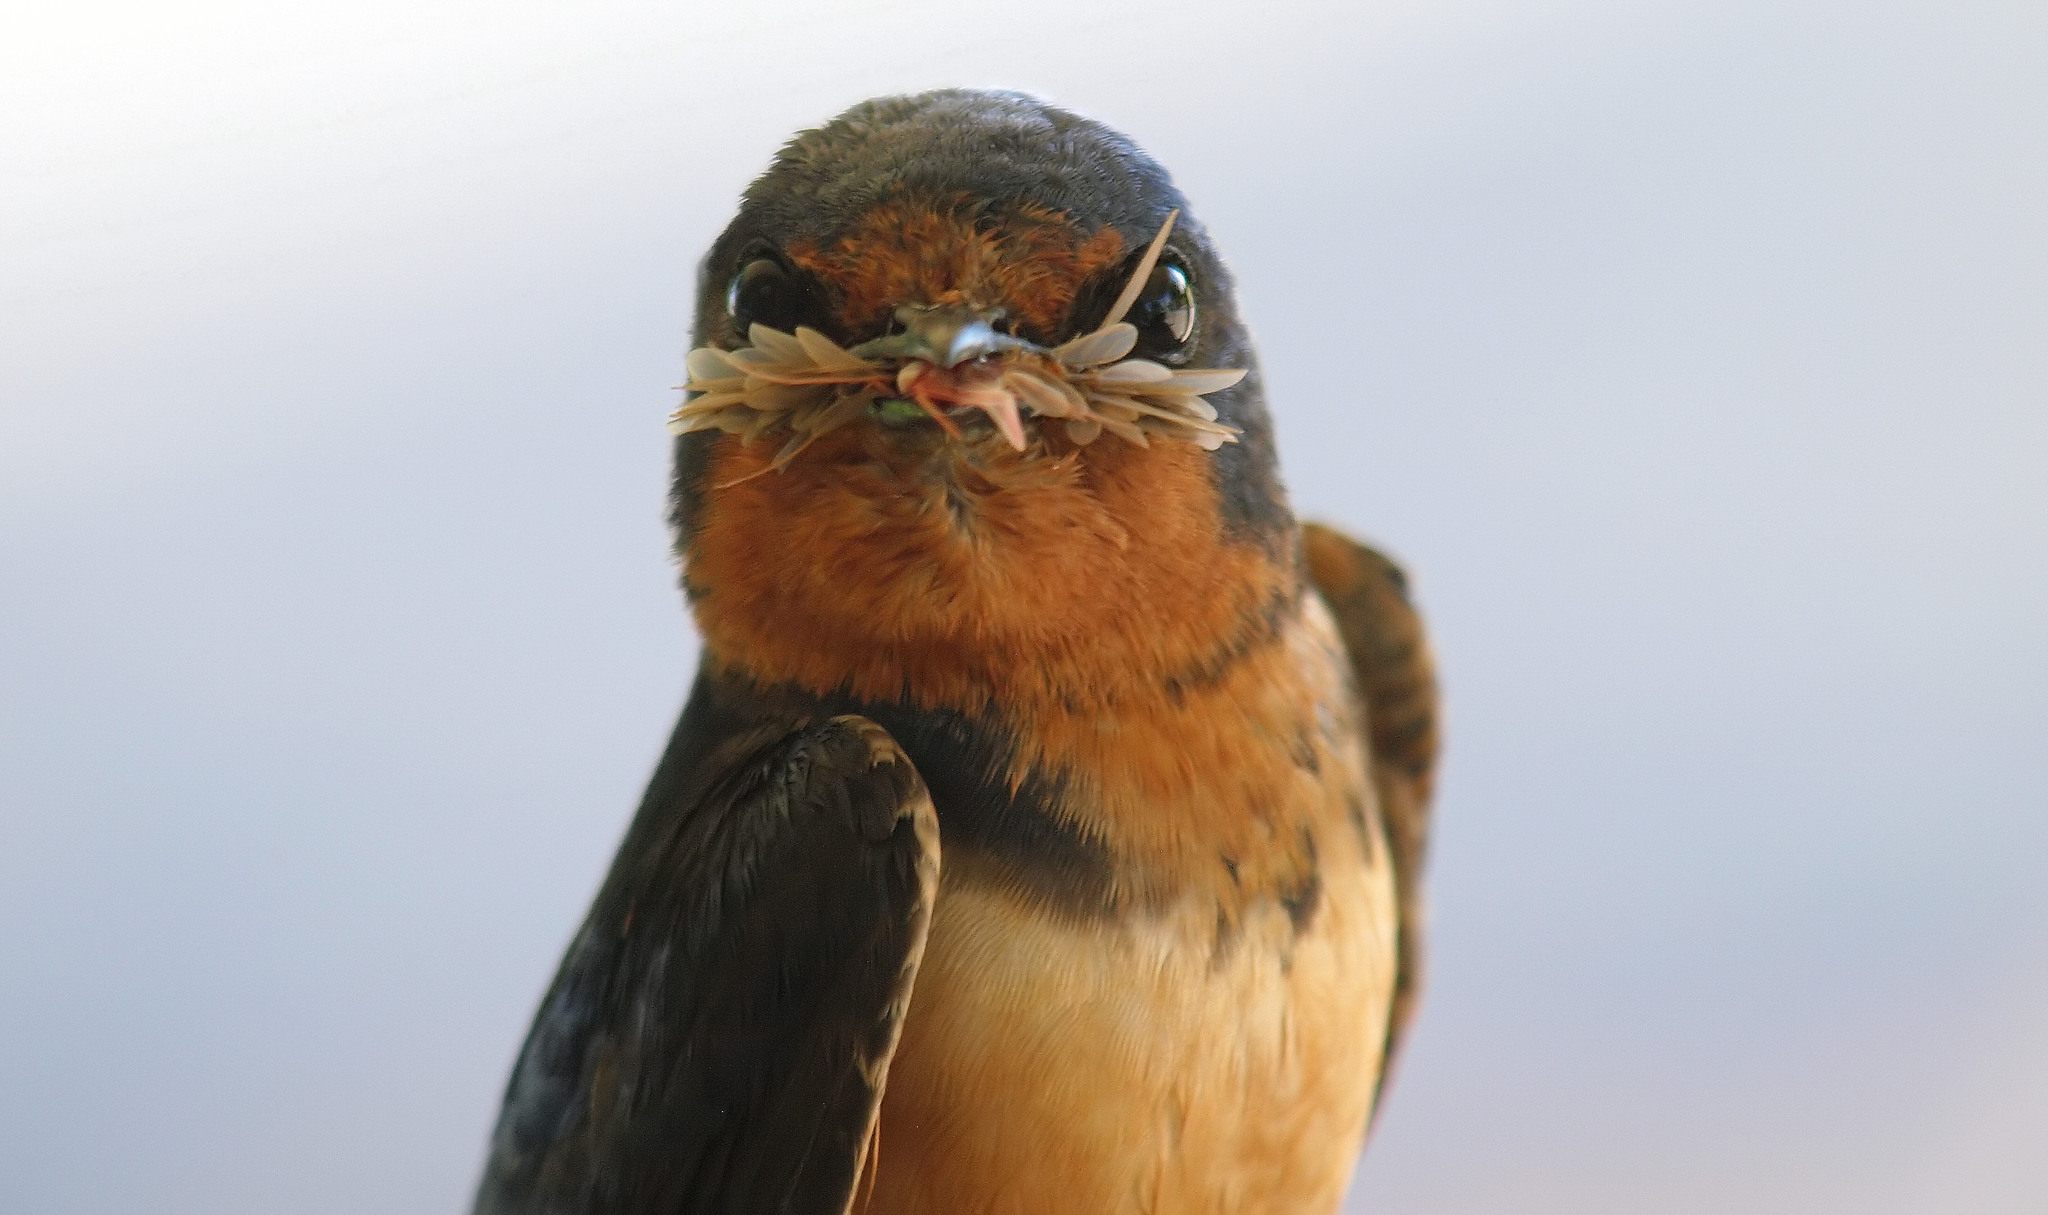 Ontario species at risk: a barn swallow with nest material in its mouth